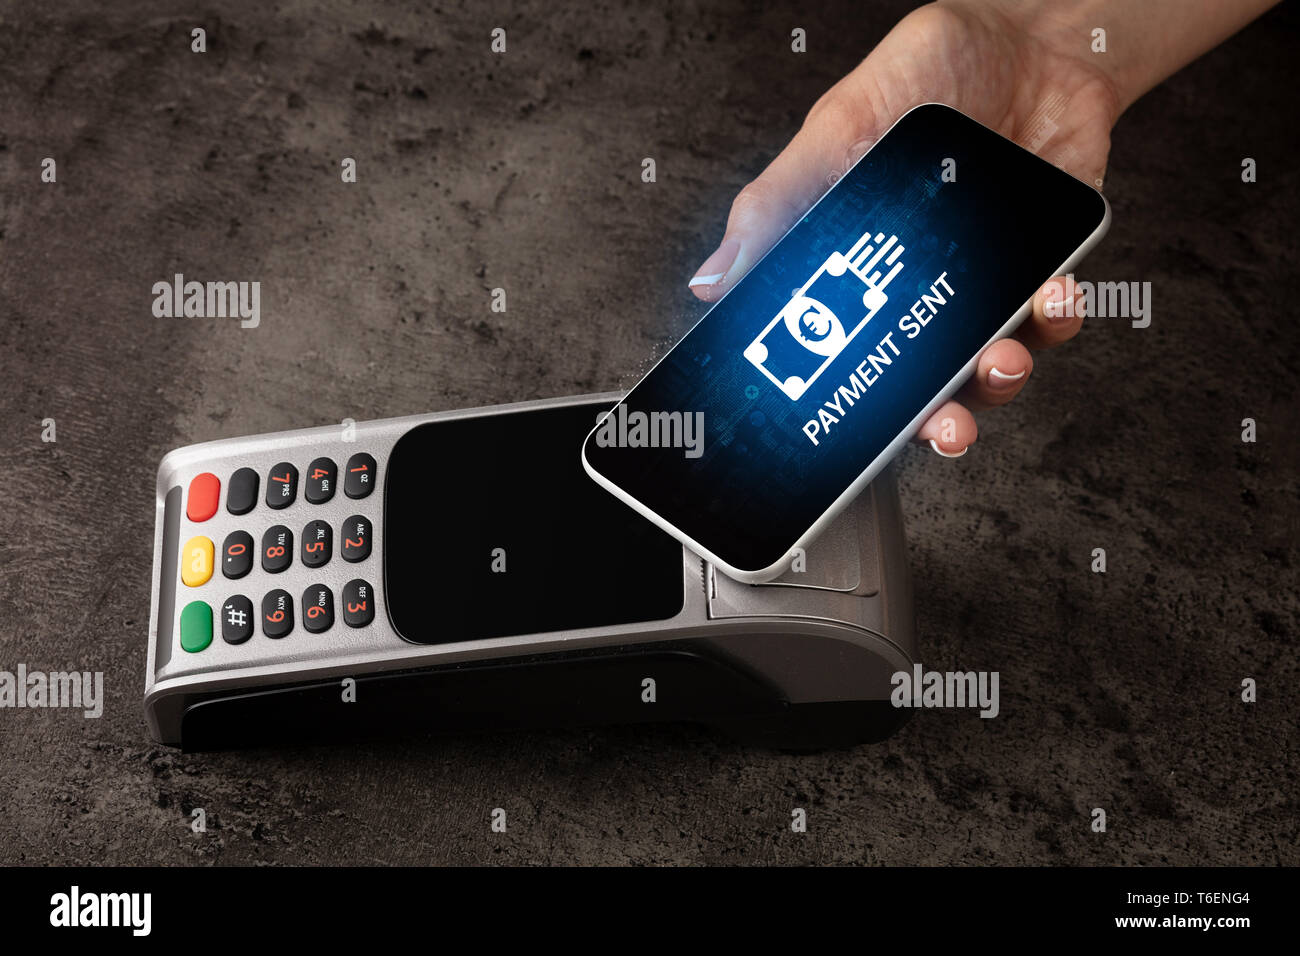 Hand paying with digital currency from smartphone  Stock Photo